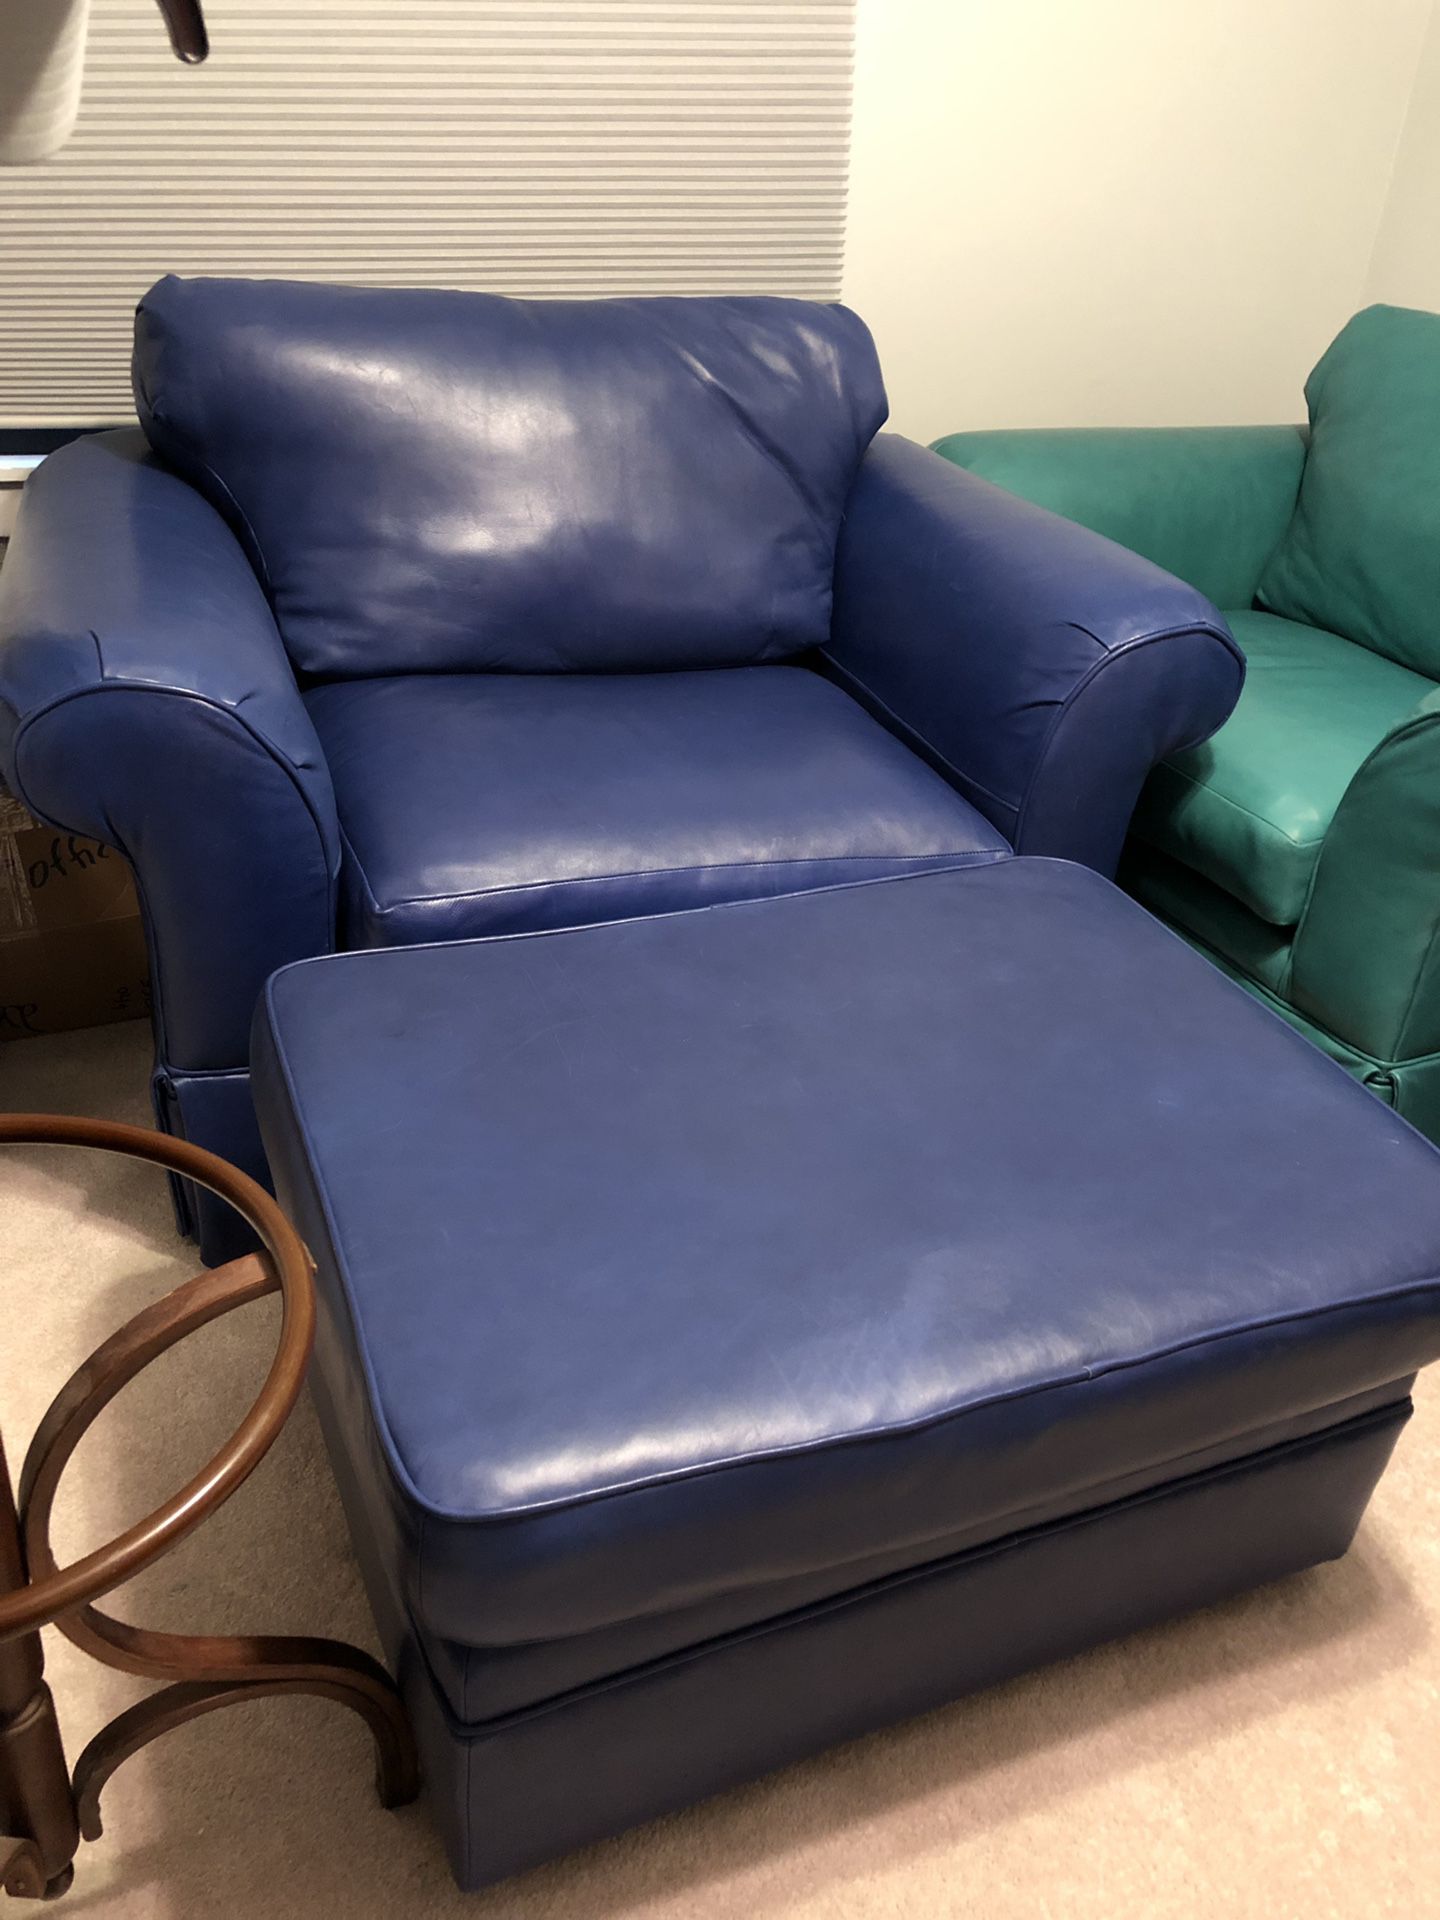 Butter Leather Overstuffed Chairs & Ottomans